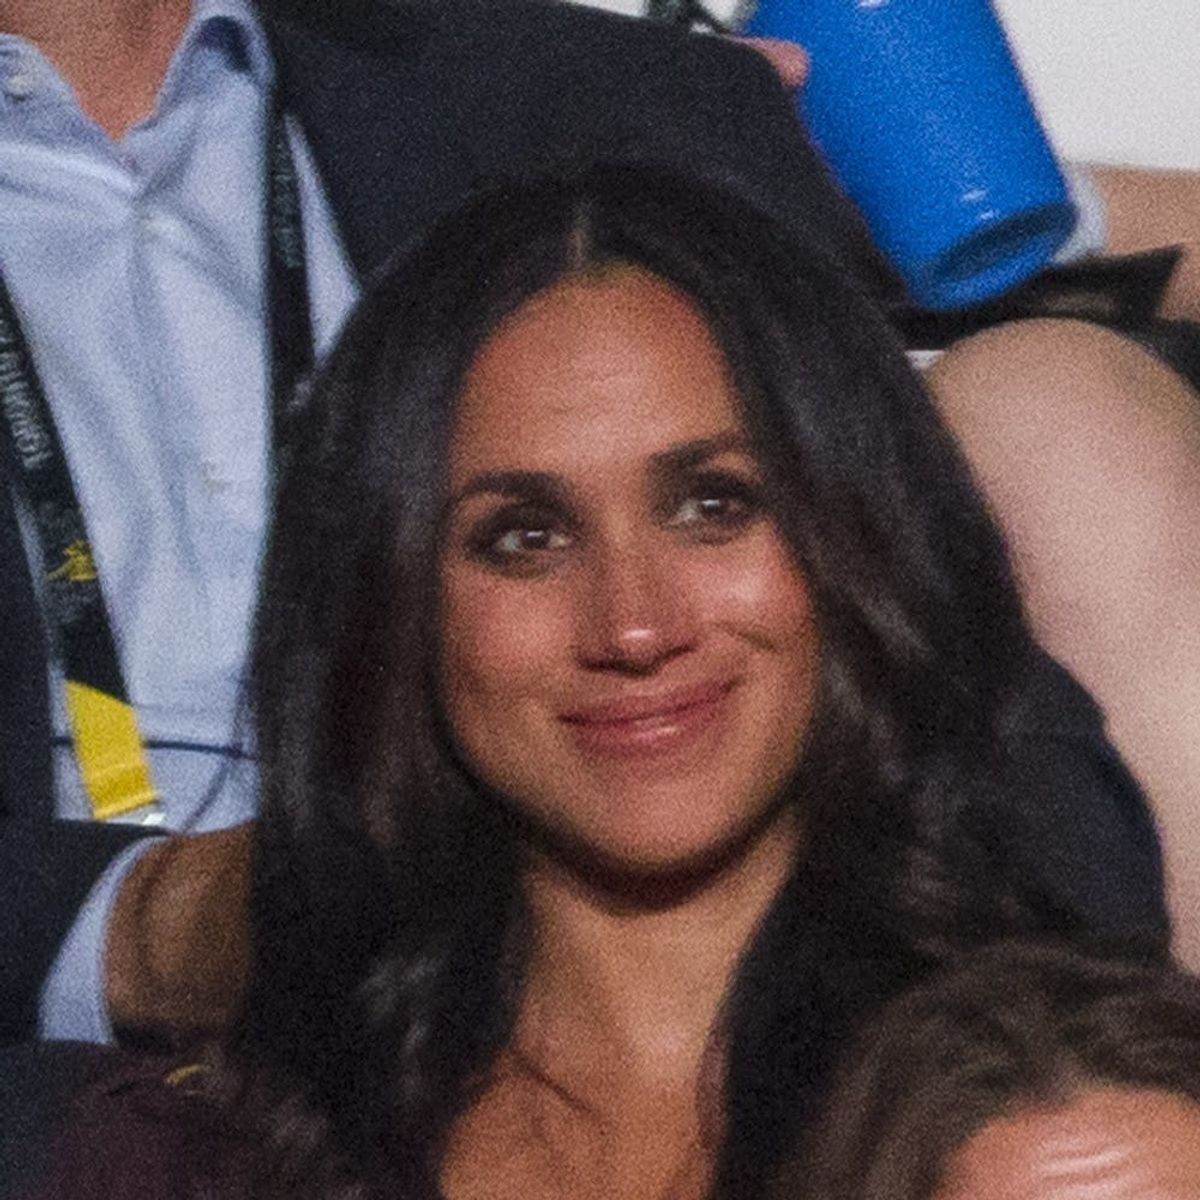 Meghan Markle Schooled Us All on How to Slay in Monochromatics at Prince Harry’s Invictus Games